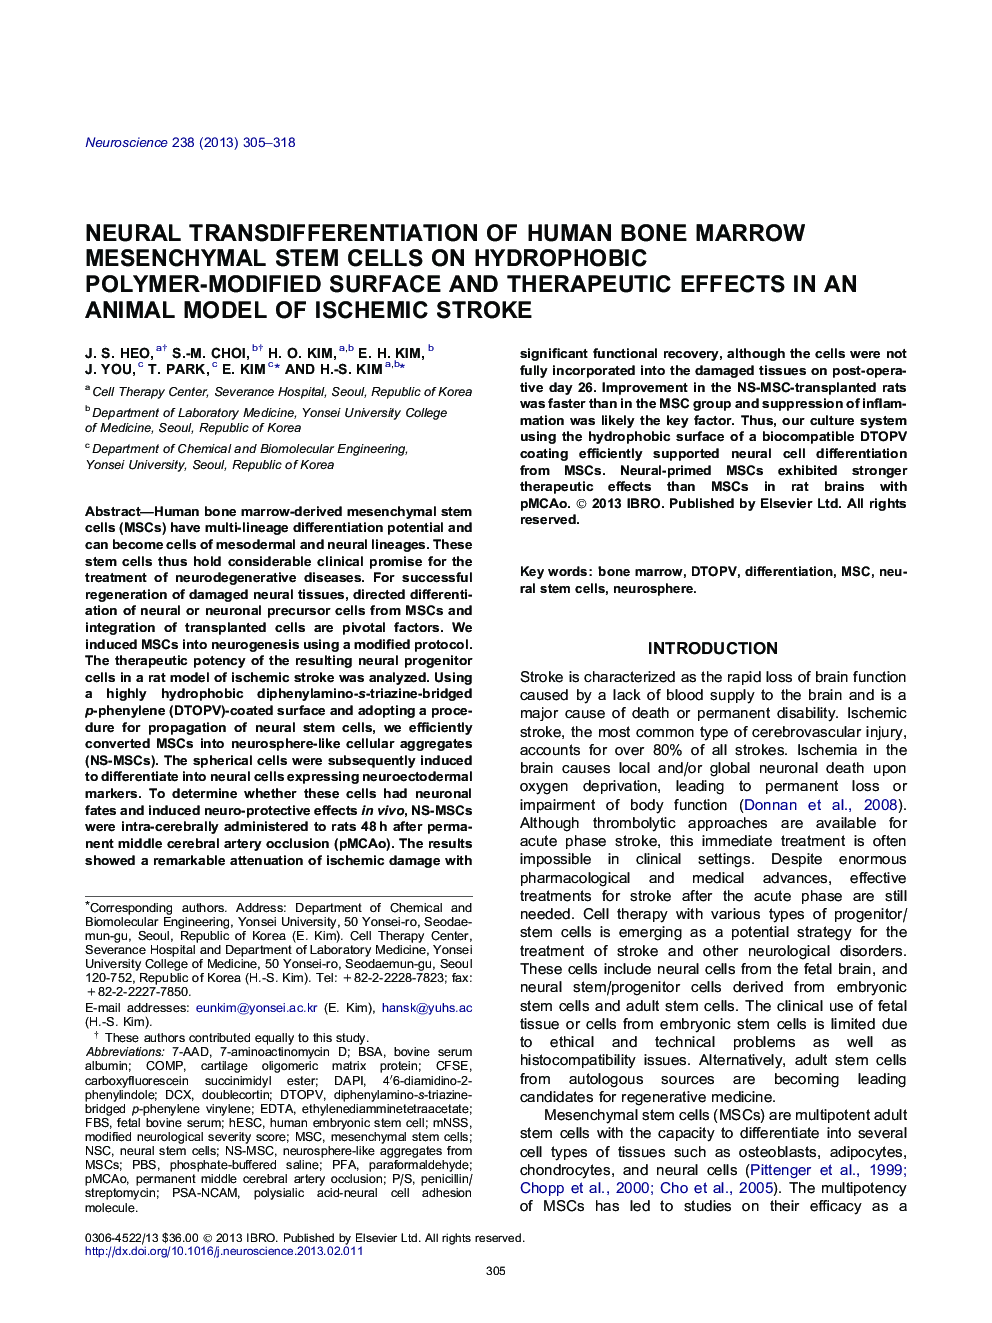 Neural transdifferentiation of human bone marrow mesenchymal stem cells on hydrophobic polymer-modified surface and therapeutic effects in an animal model of ischemic stroke